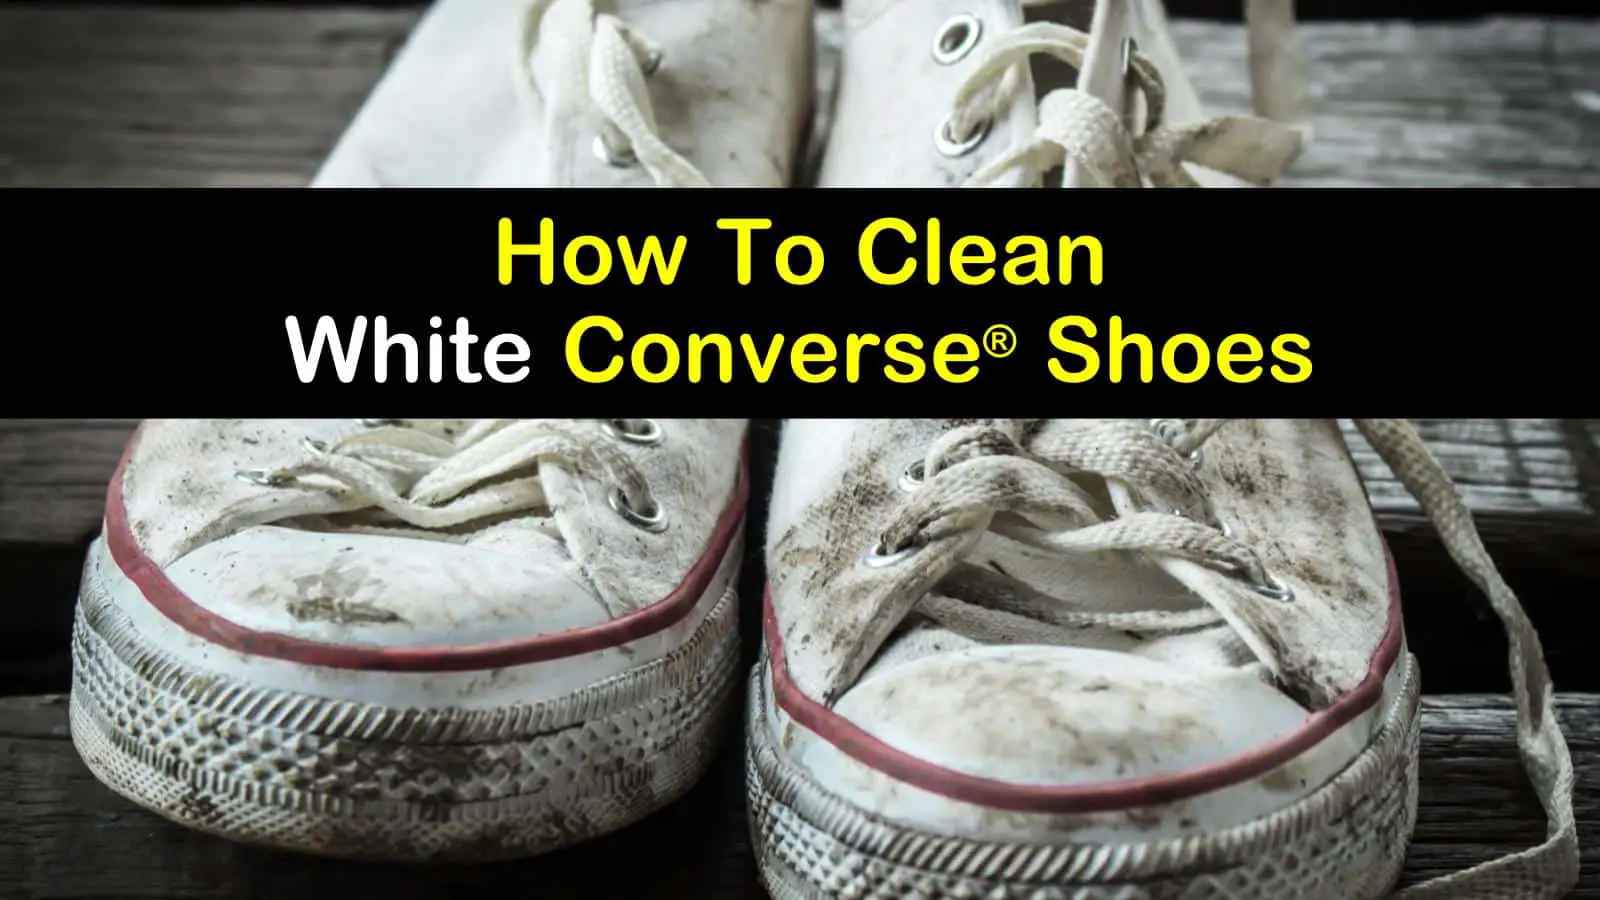 4 Smart &  Simple Ways to Clean White ConverseÂ® Shoes